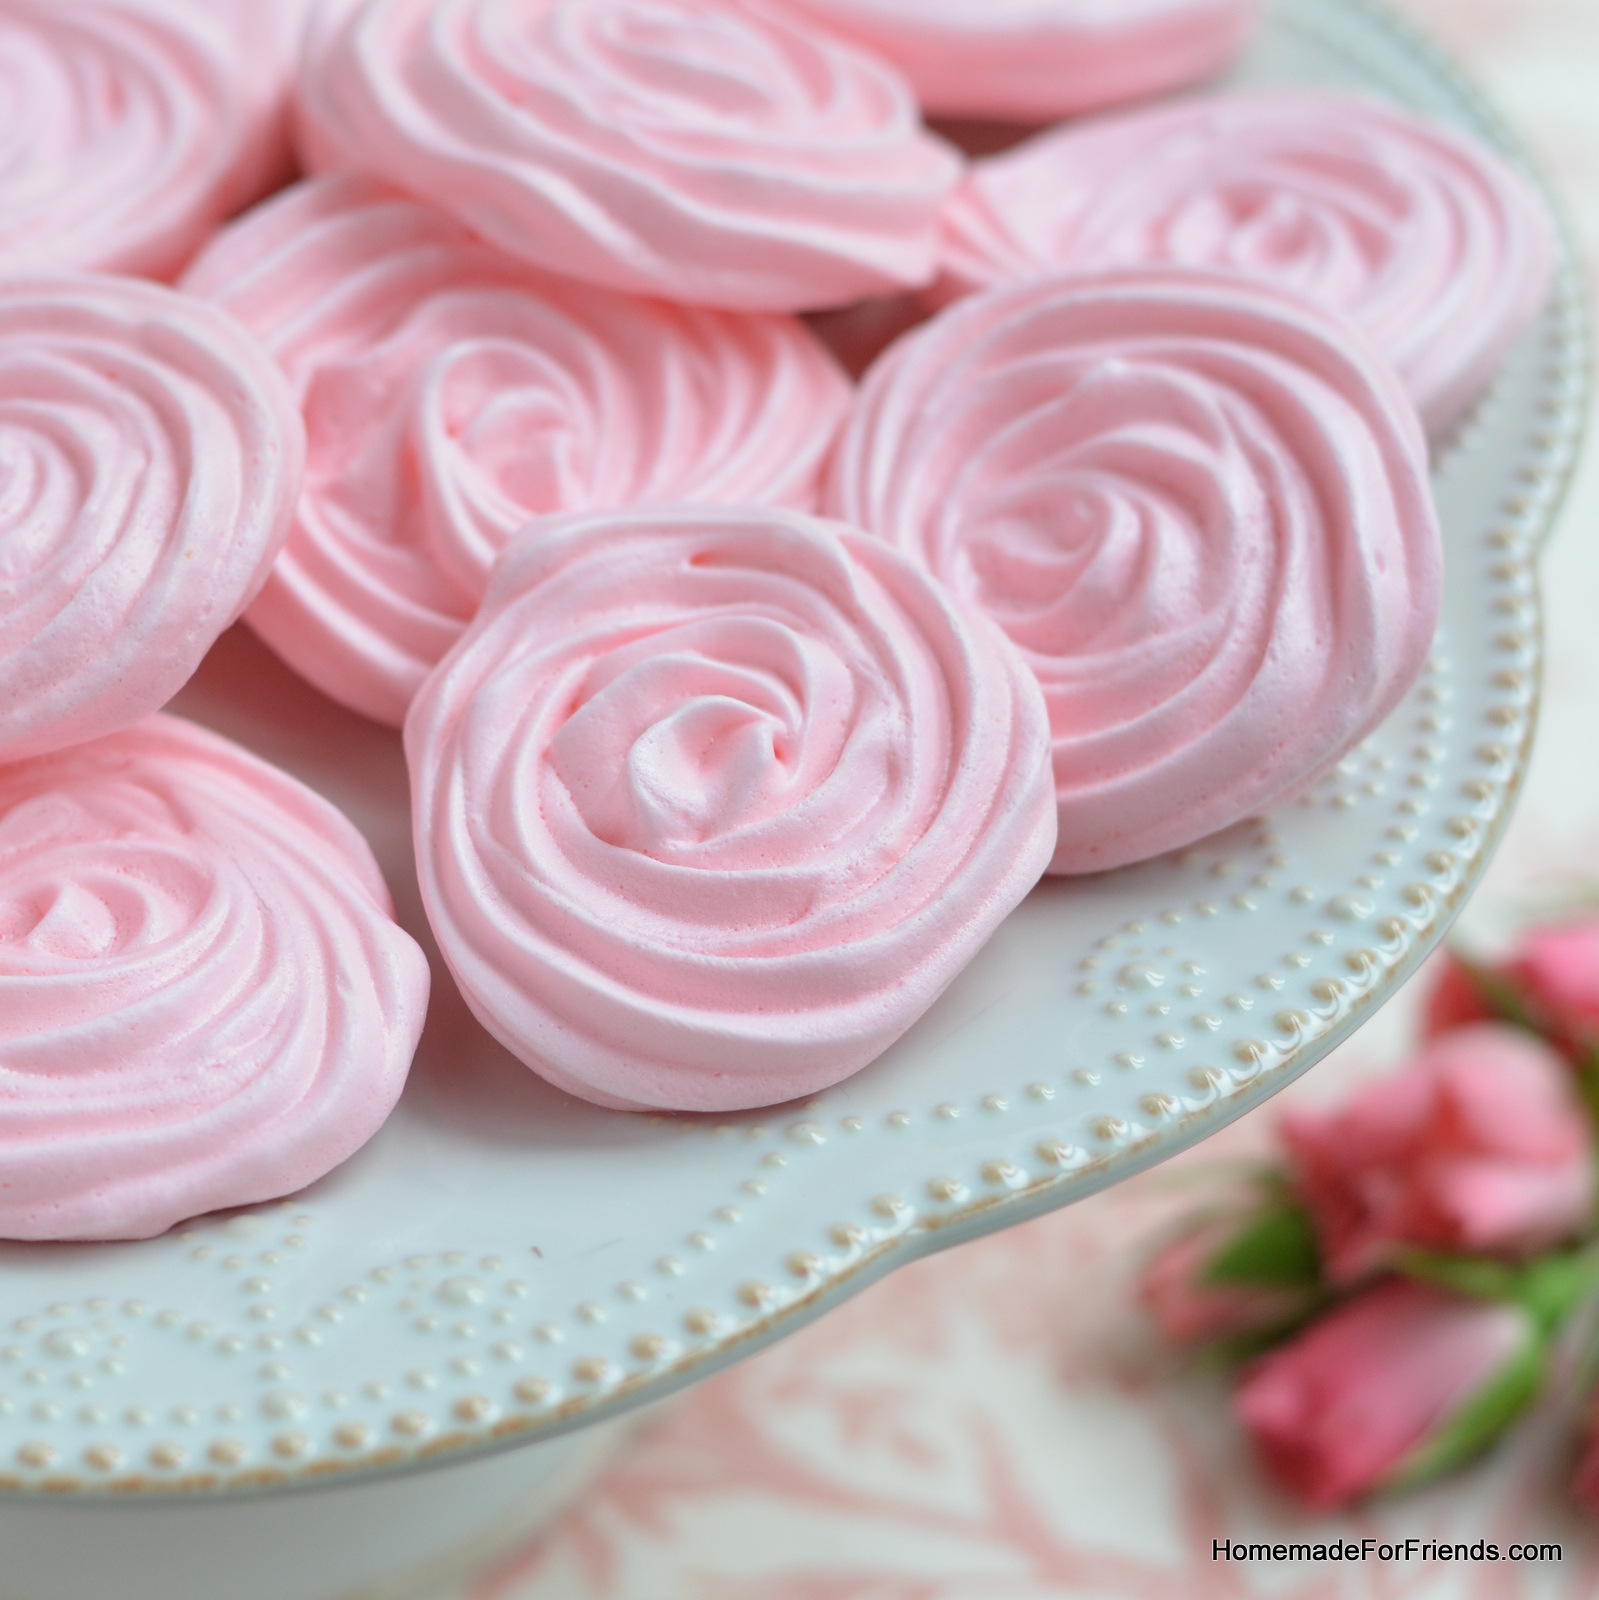 A raspberry rose meringue by any other name would taste just as sweet!